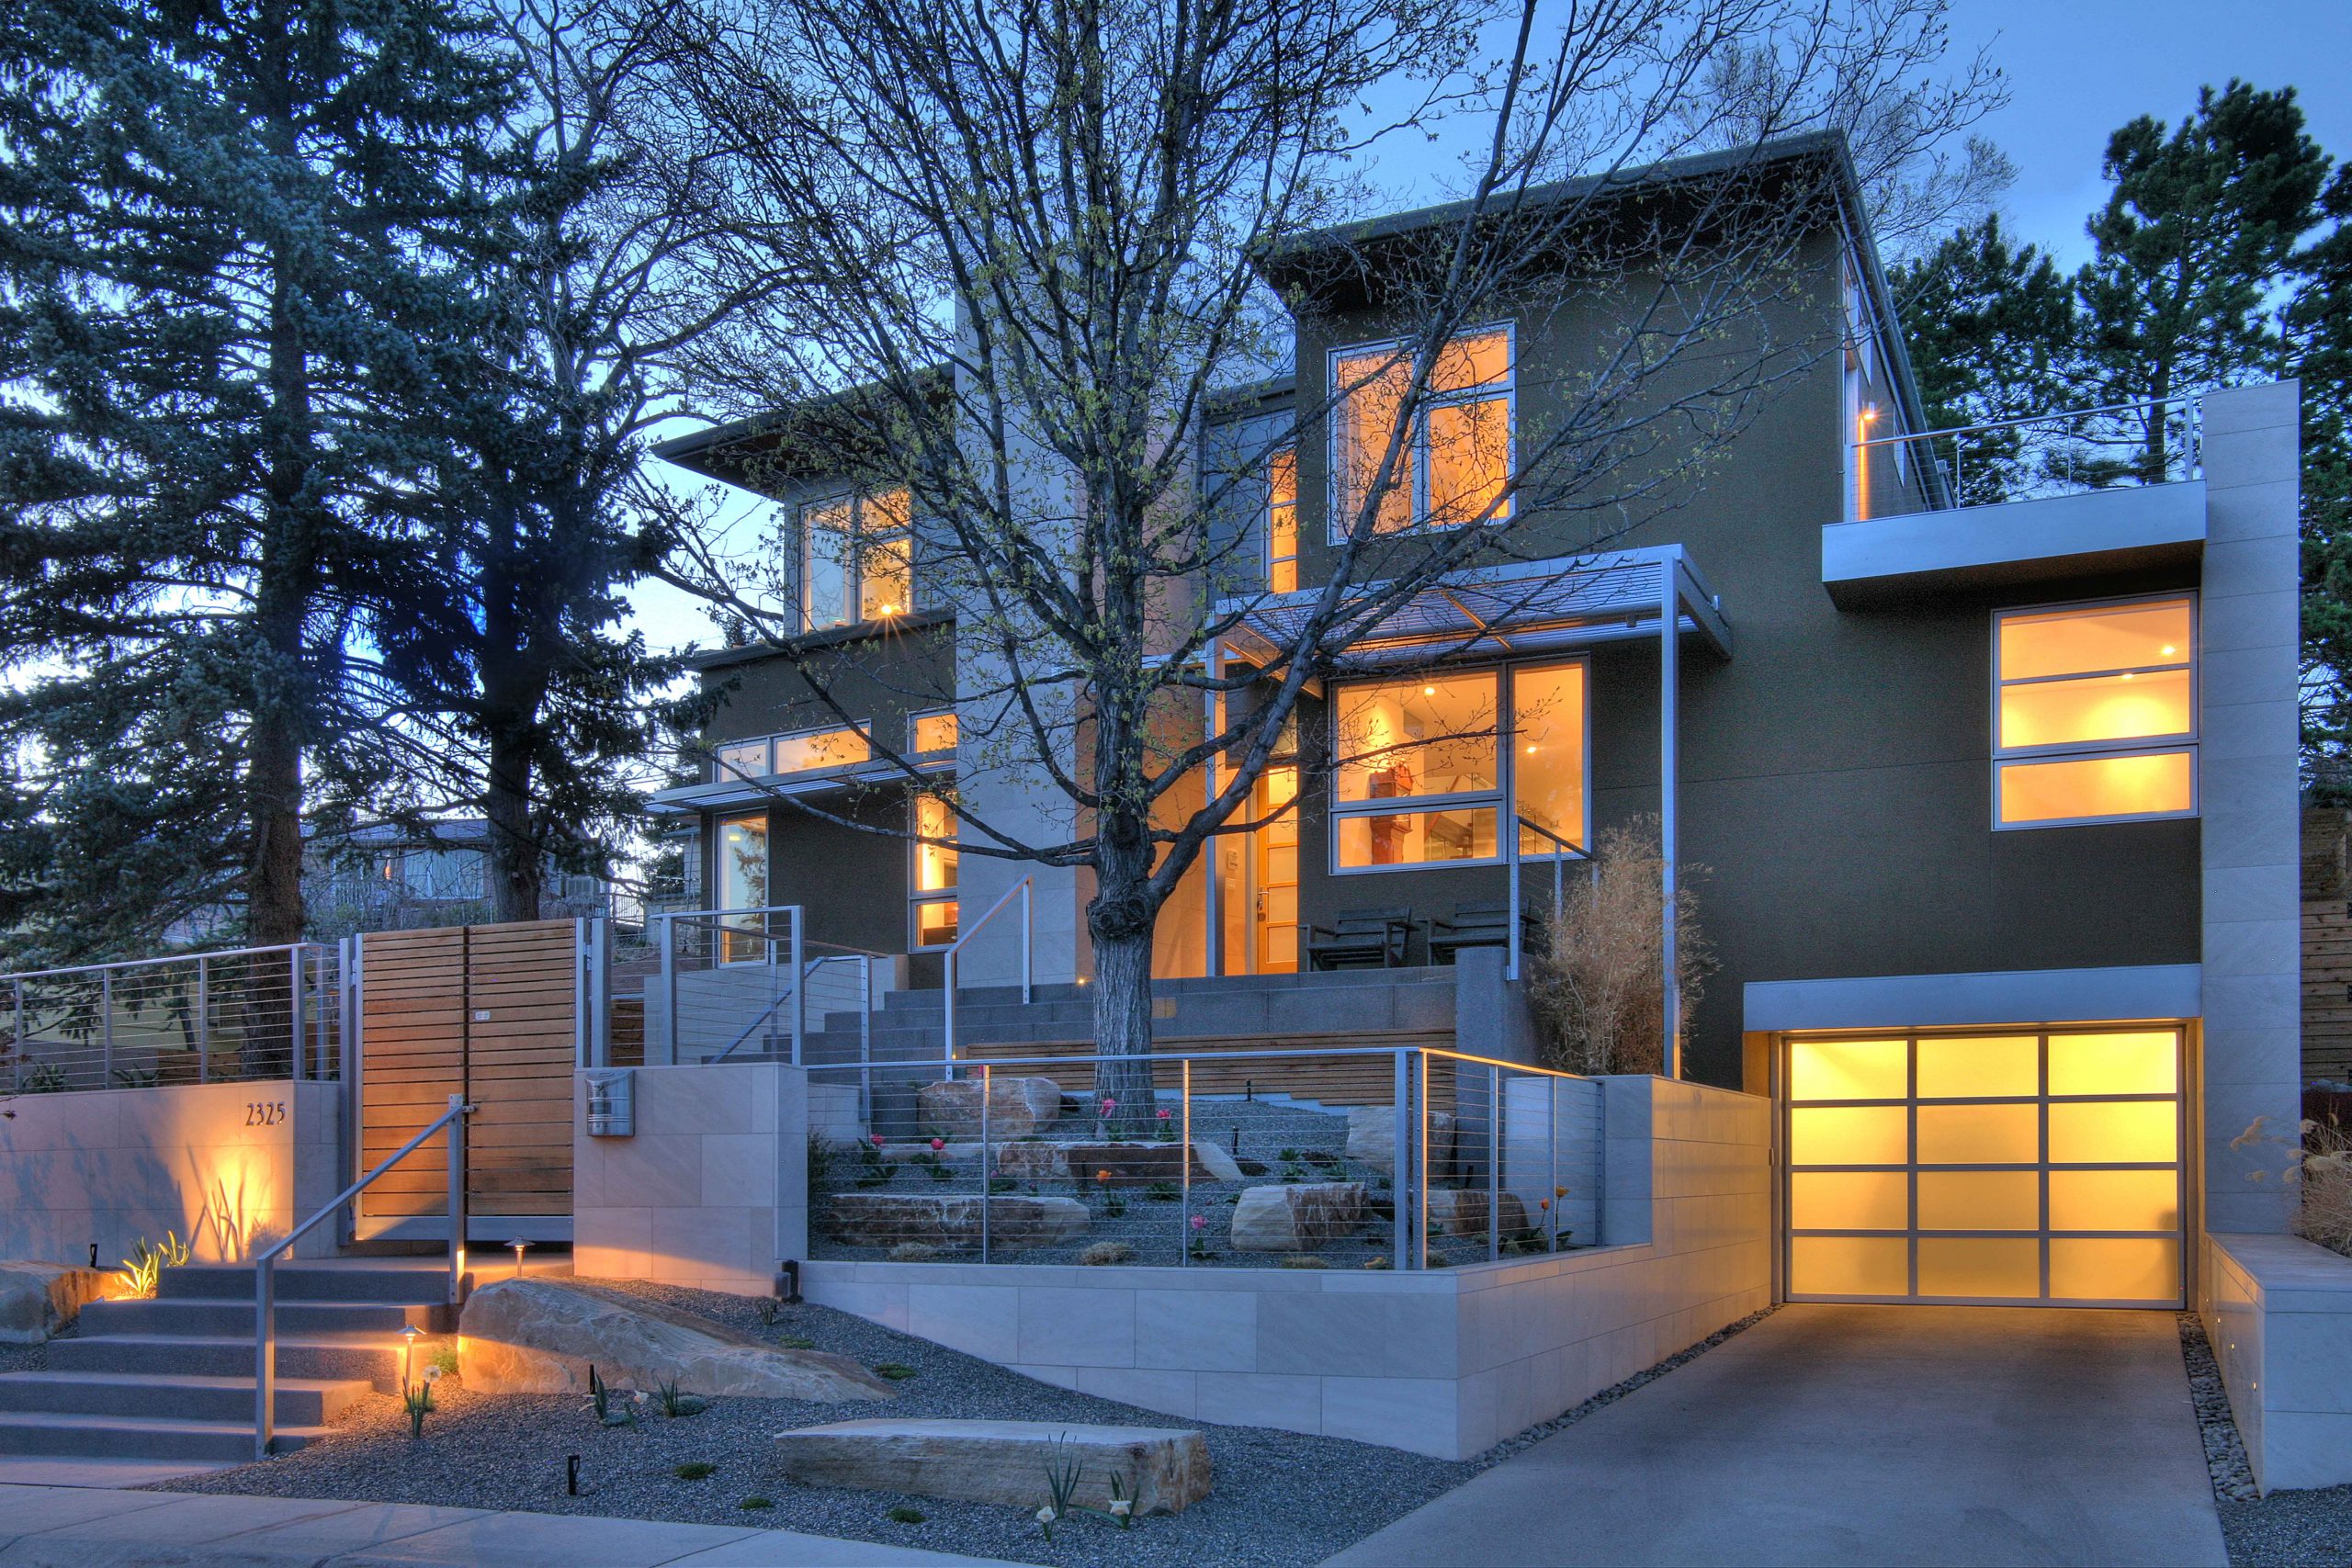 Gunderson Residence Glowing Front Facade at Dusk